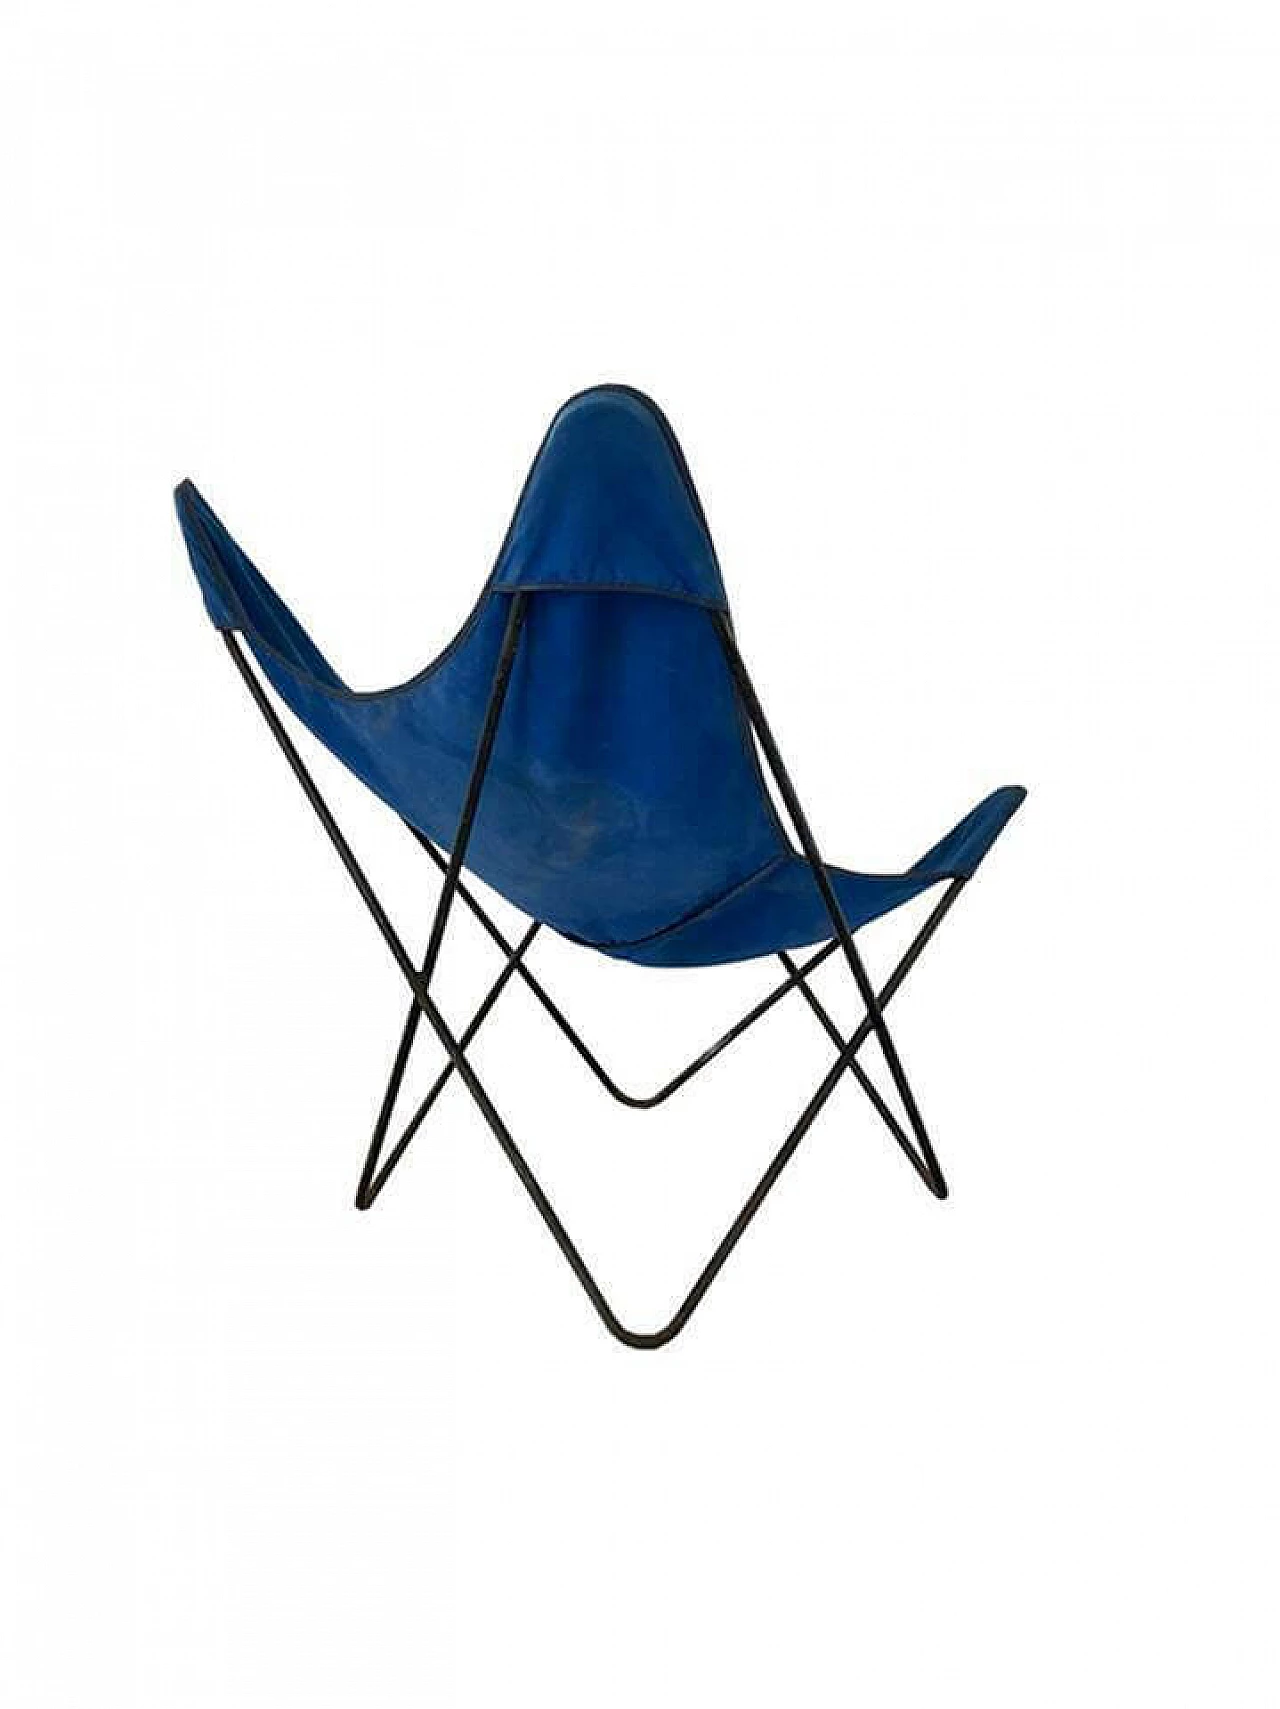 Butterfly armchair by Jeorge Hardoy Ferrari for Knoll, 70's 1110064